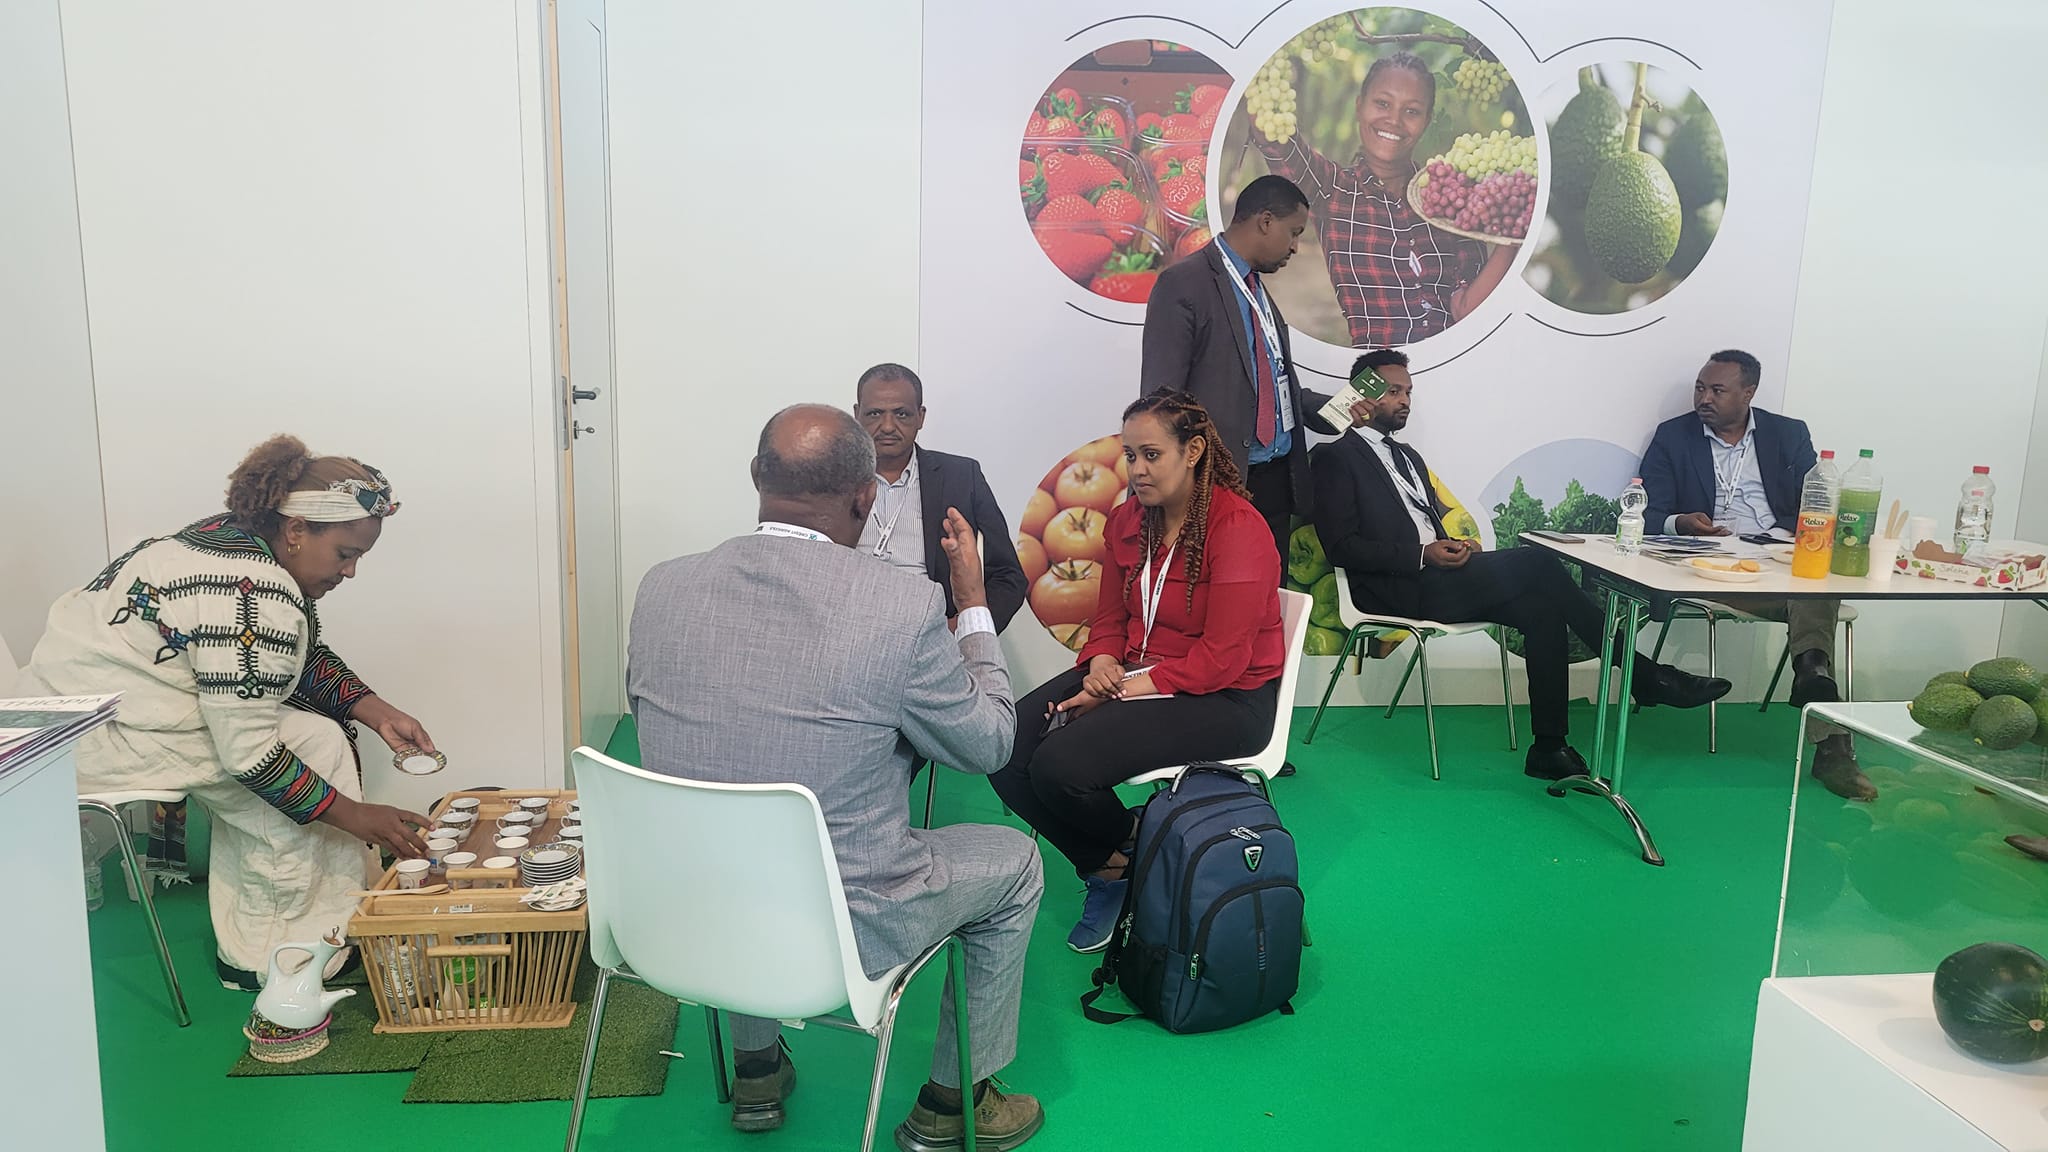 EHPEA represents its member farms at the 40th edition of Macfrut 2023 expo